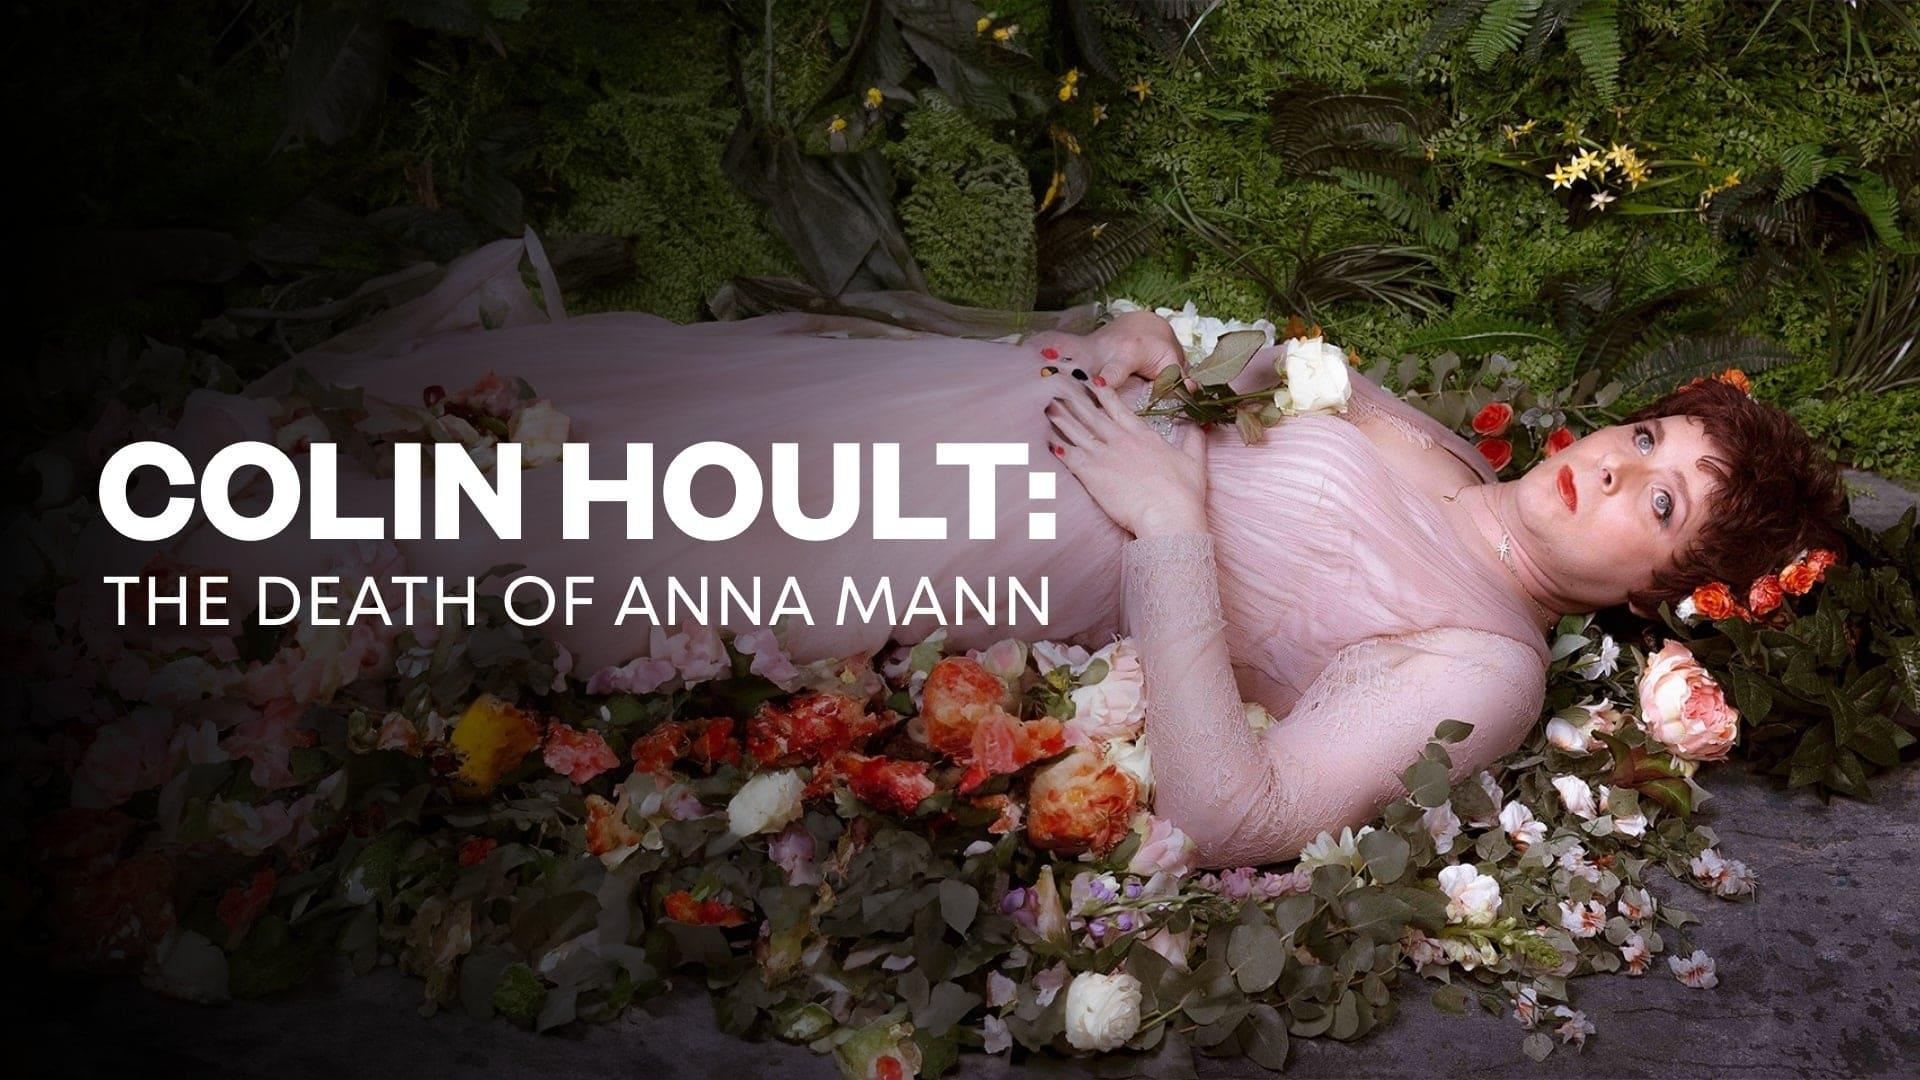 Colin Hoult: The Death of Anna Mann backdrop